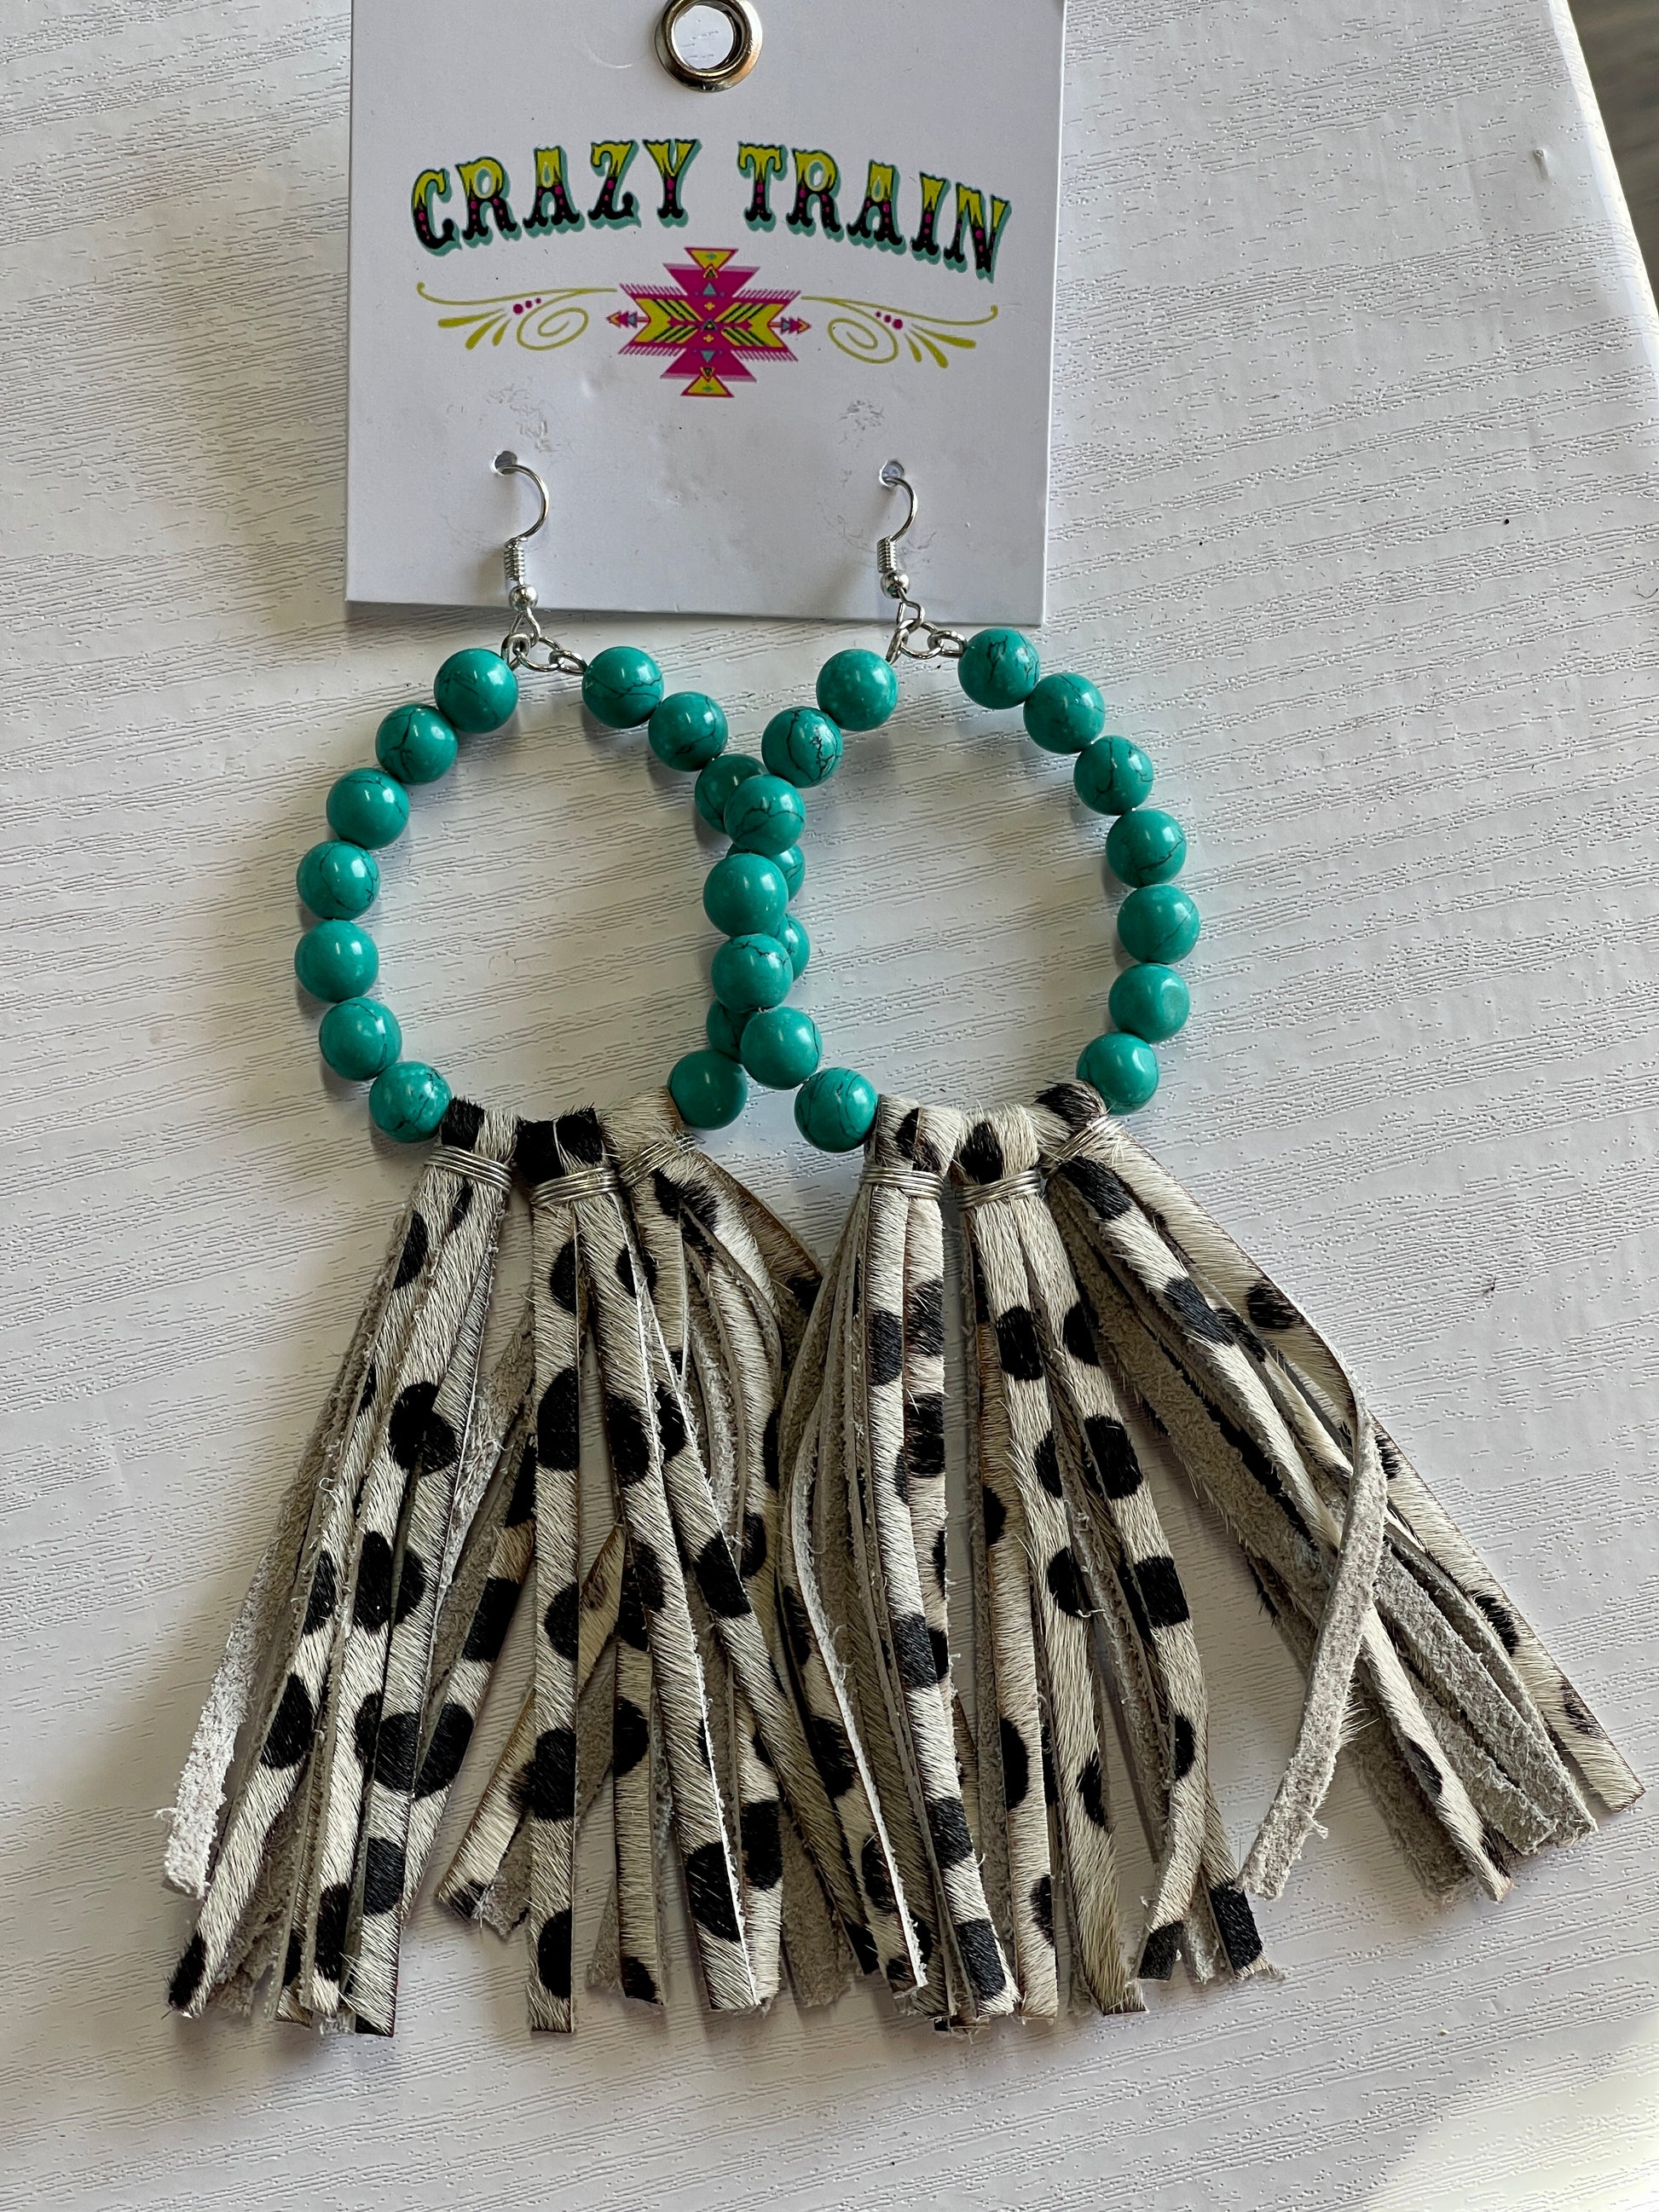 Crazy Train brand earrings.  Oval shape lined with teal beads.  Brown and cream cowhide printed leather tassels hang off bottom.